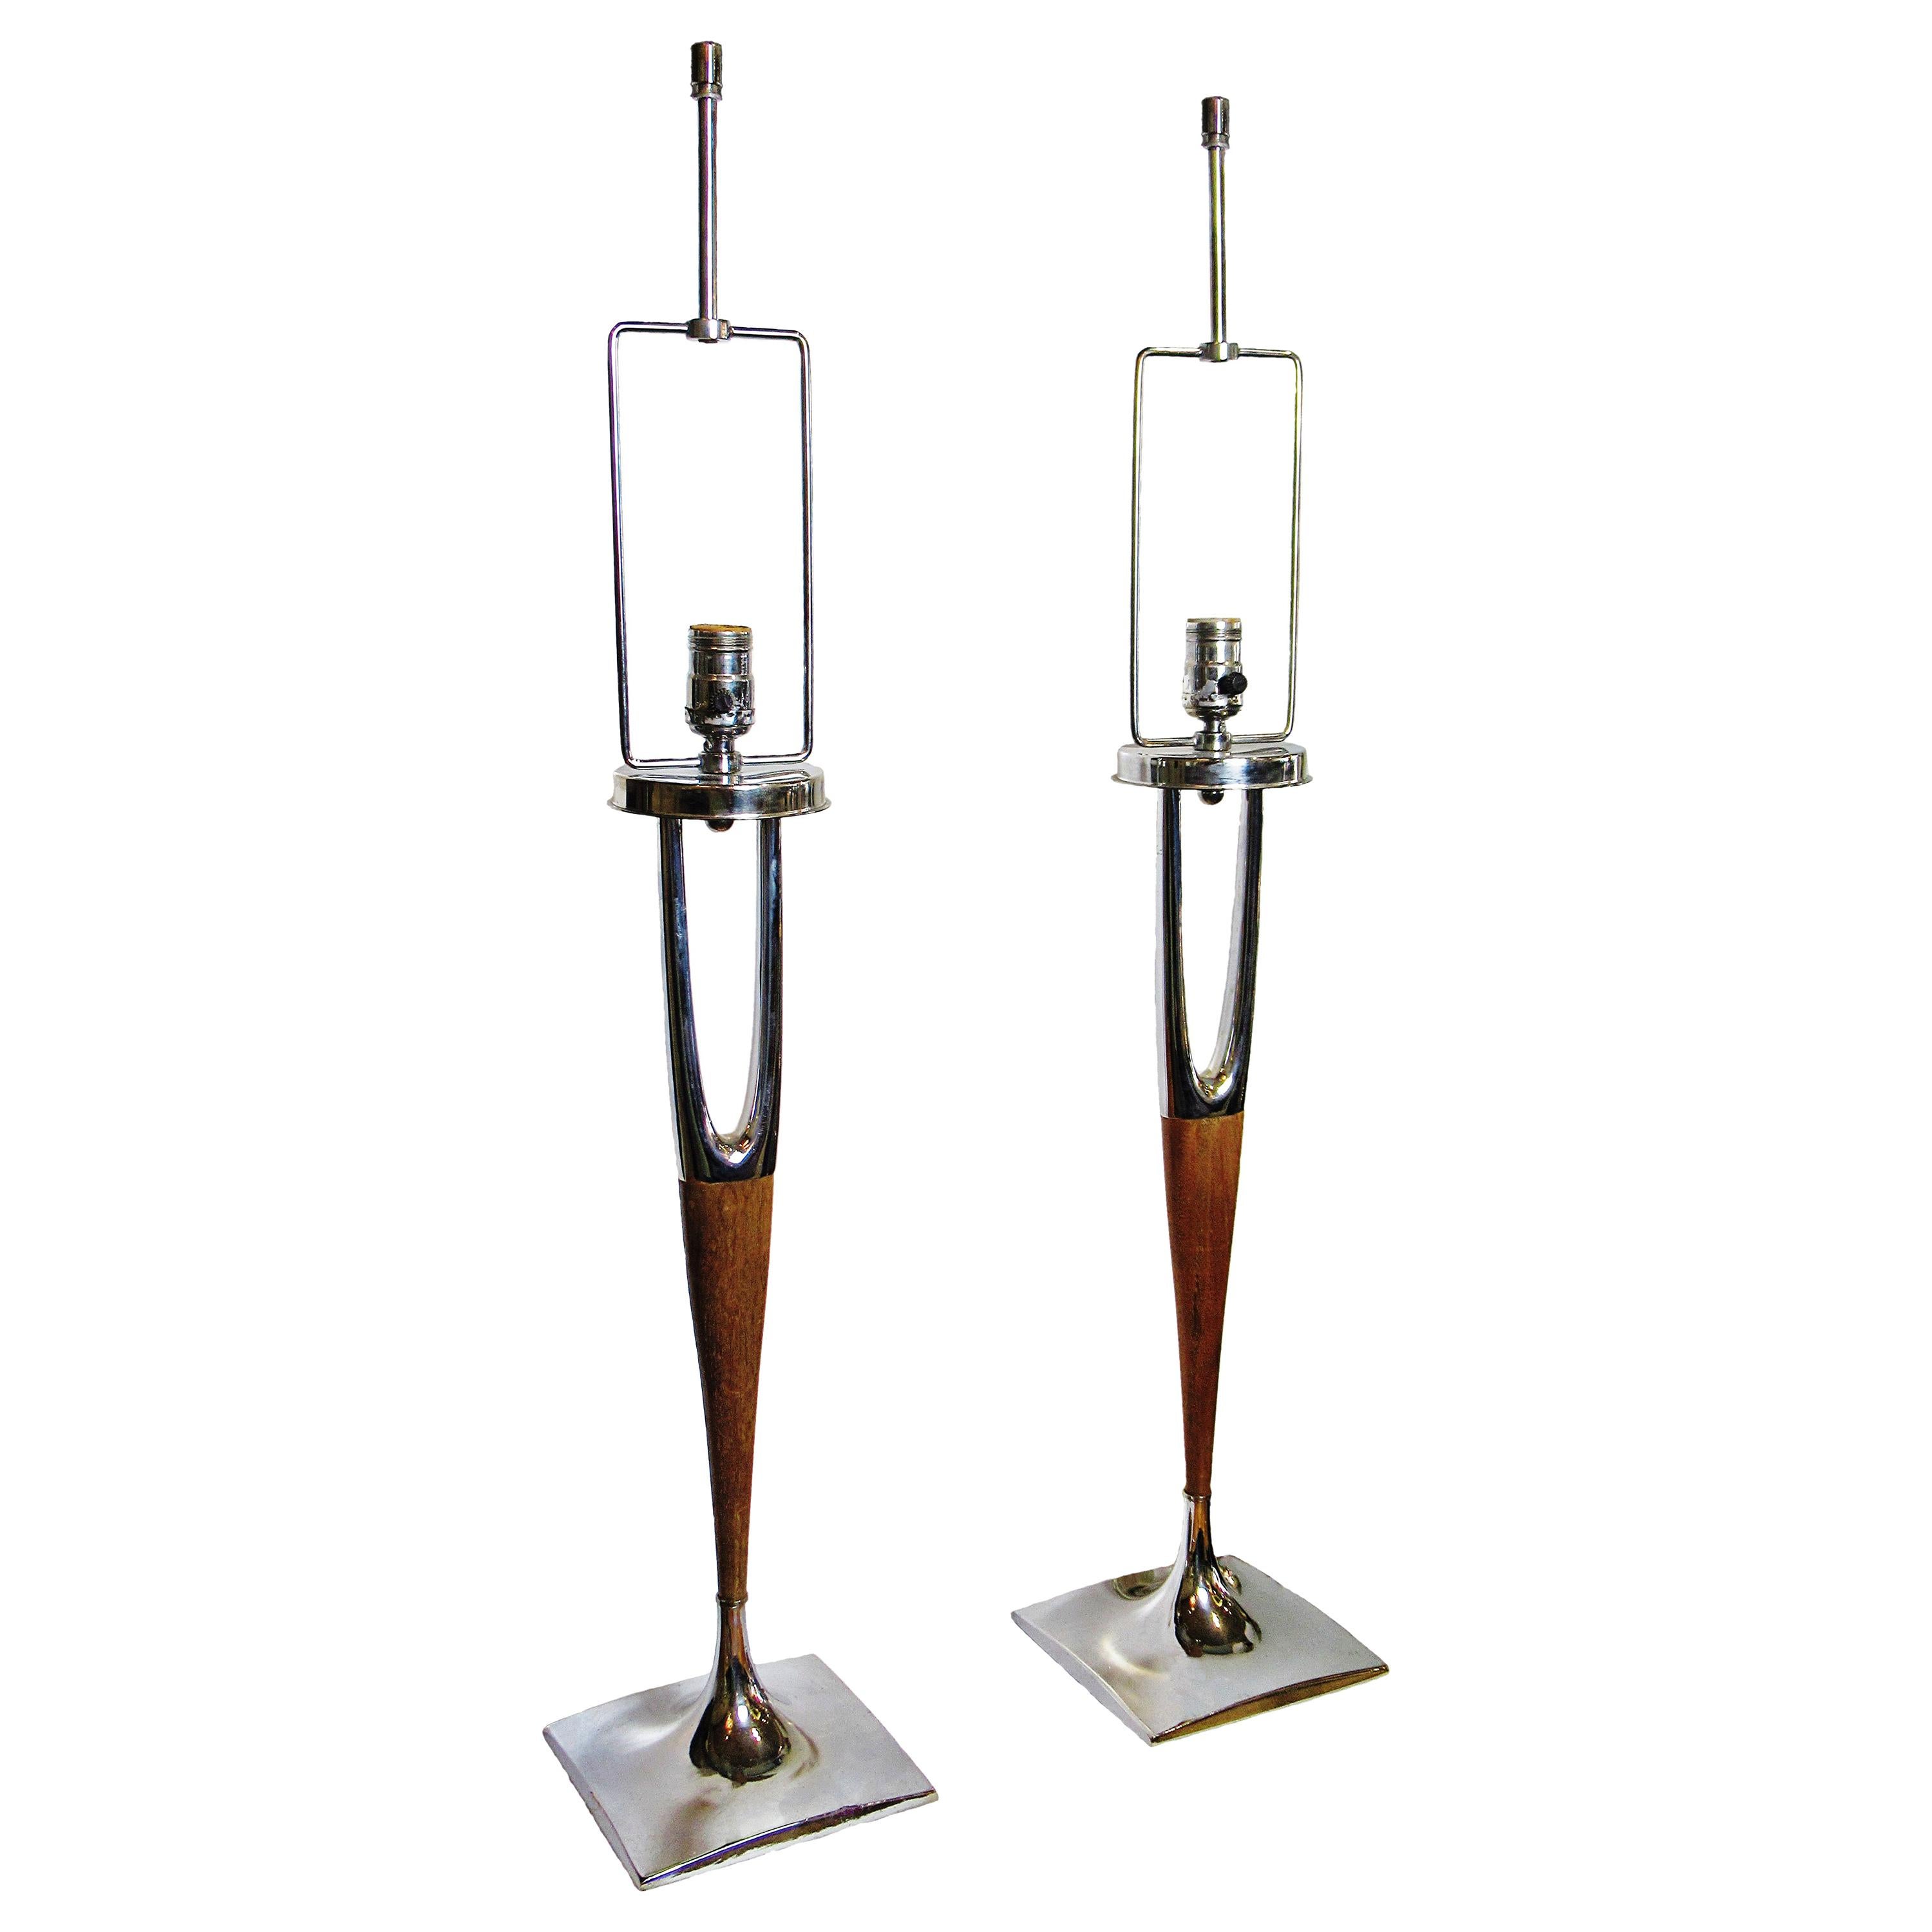 Pair of American Modern Mahogany and Polished Nickel Table Lamps, Laurel Lamp Co